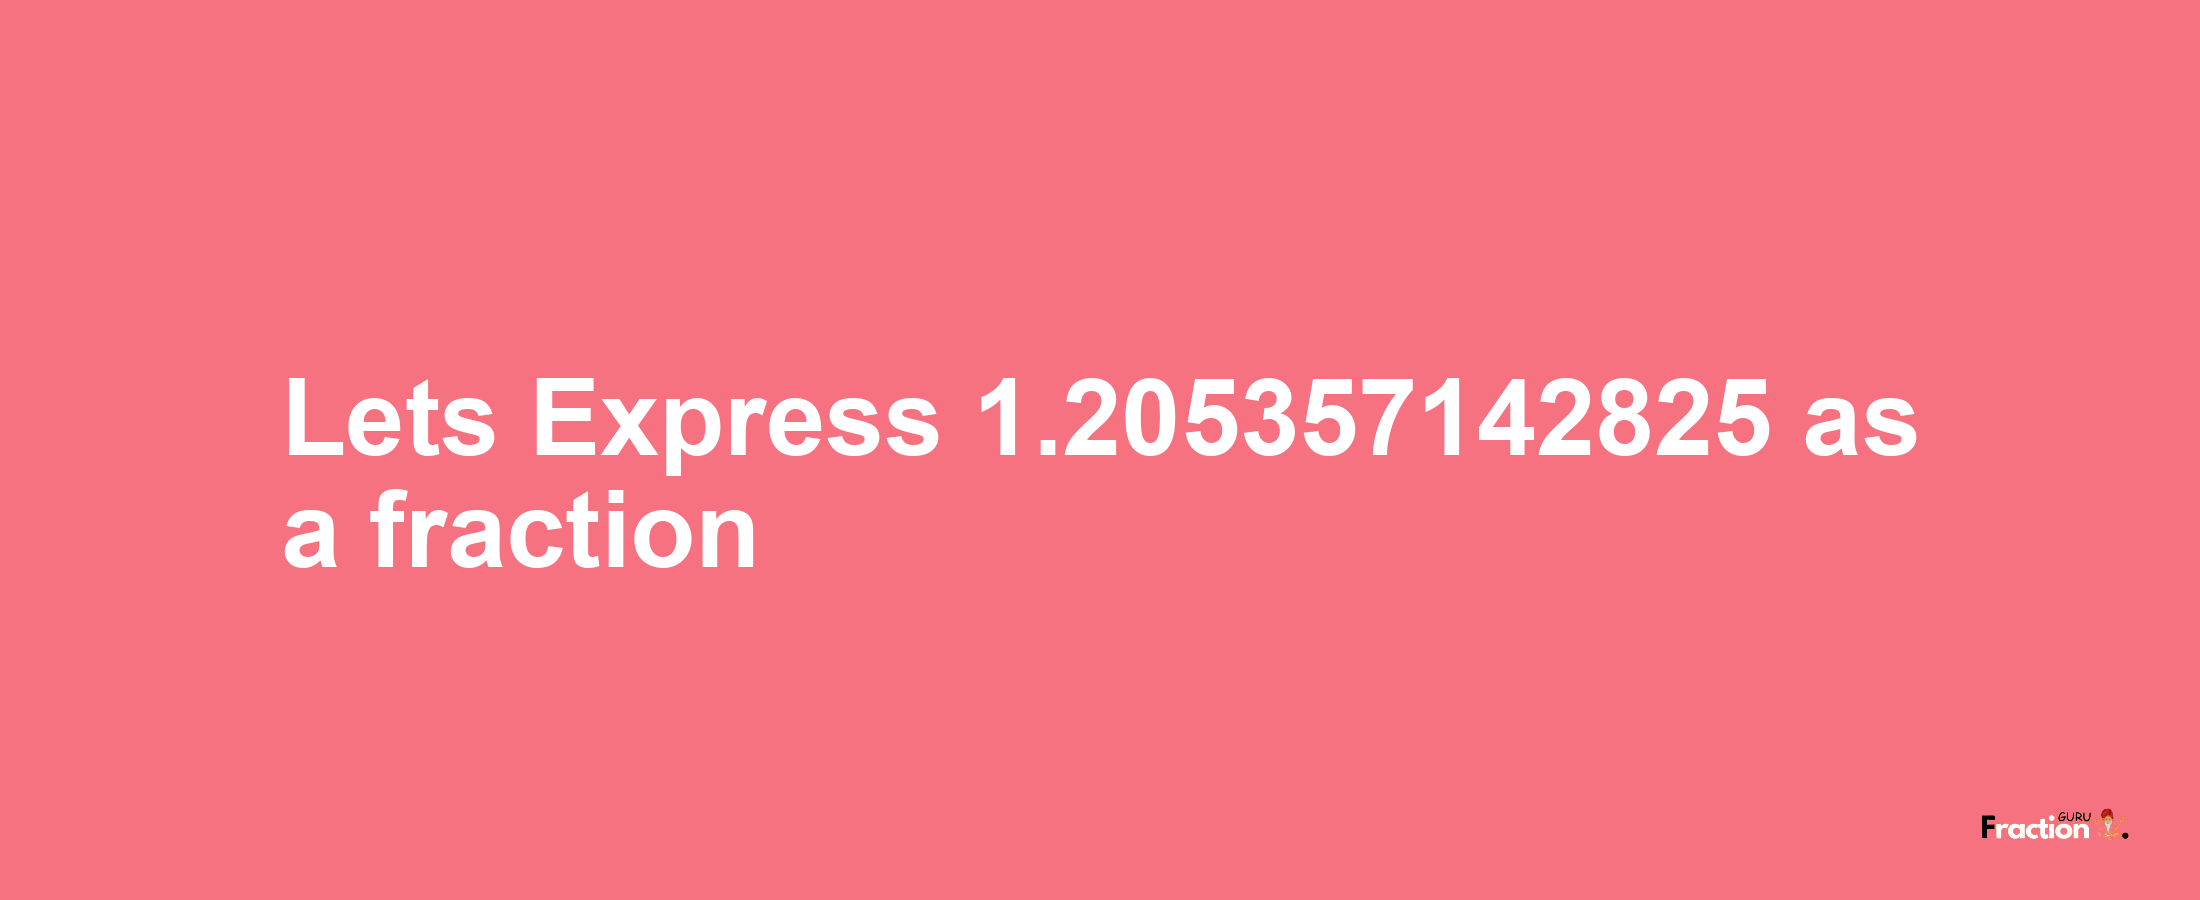 Lets Express 1.205357142825 as afraction